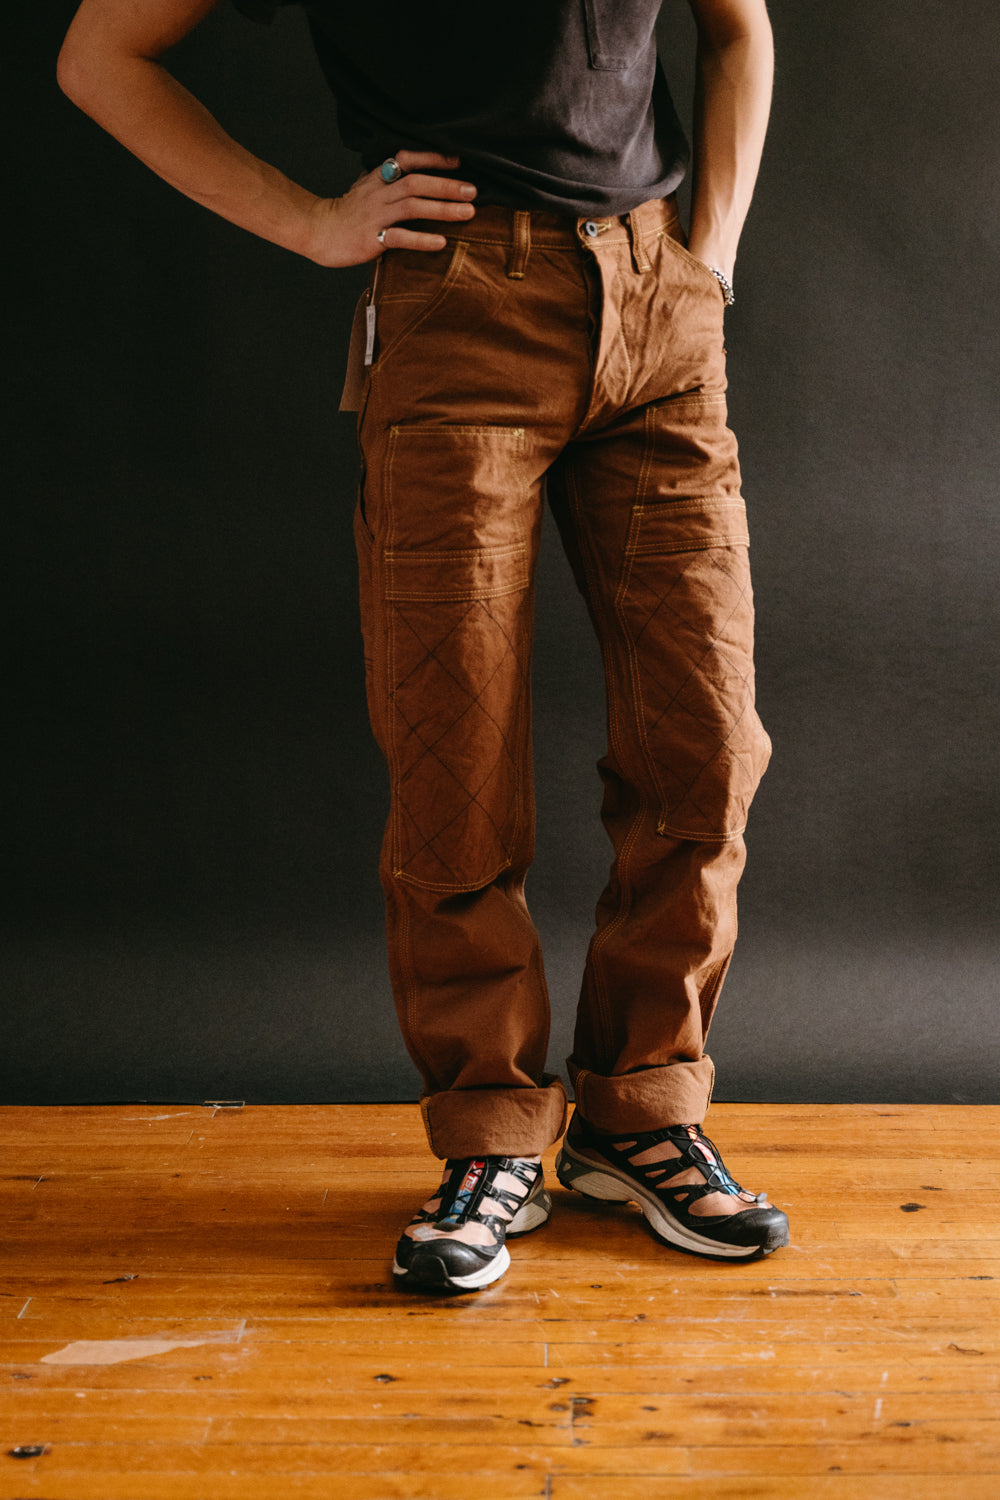 Carhartt B136DKB Double Front Work Dungaree Washed Duck Canvas